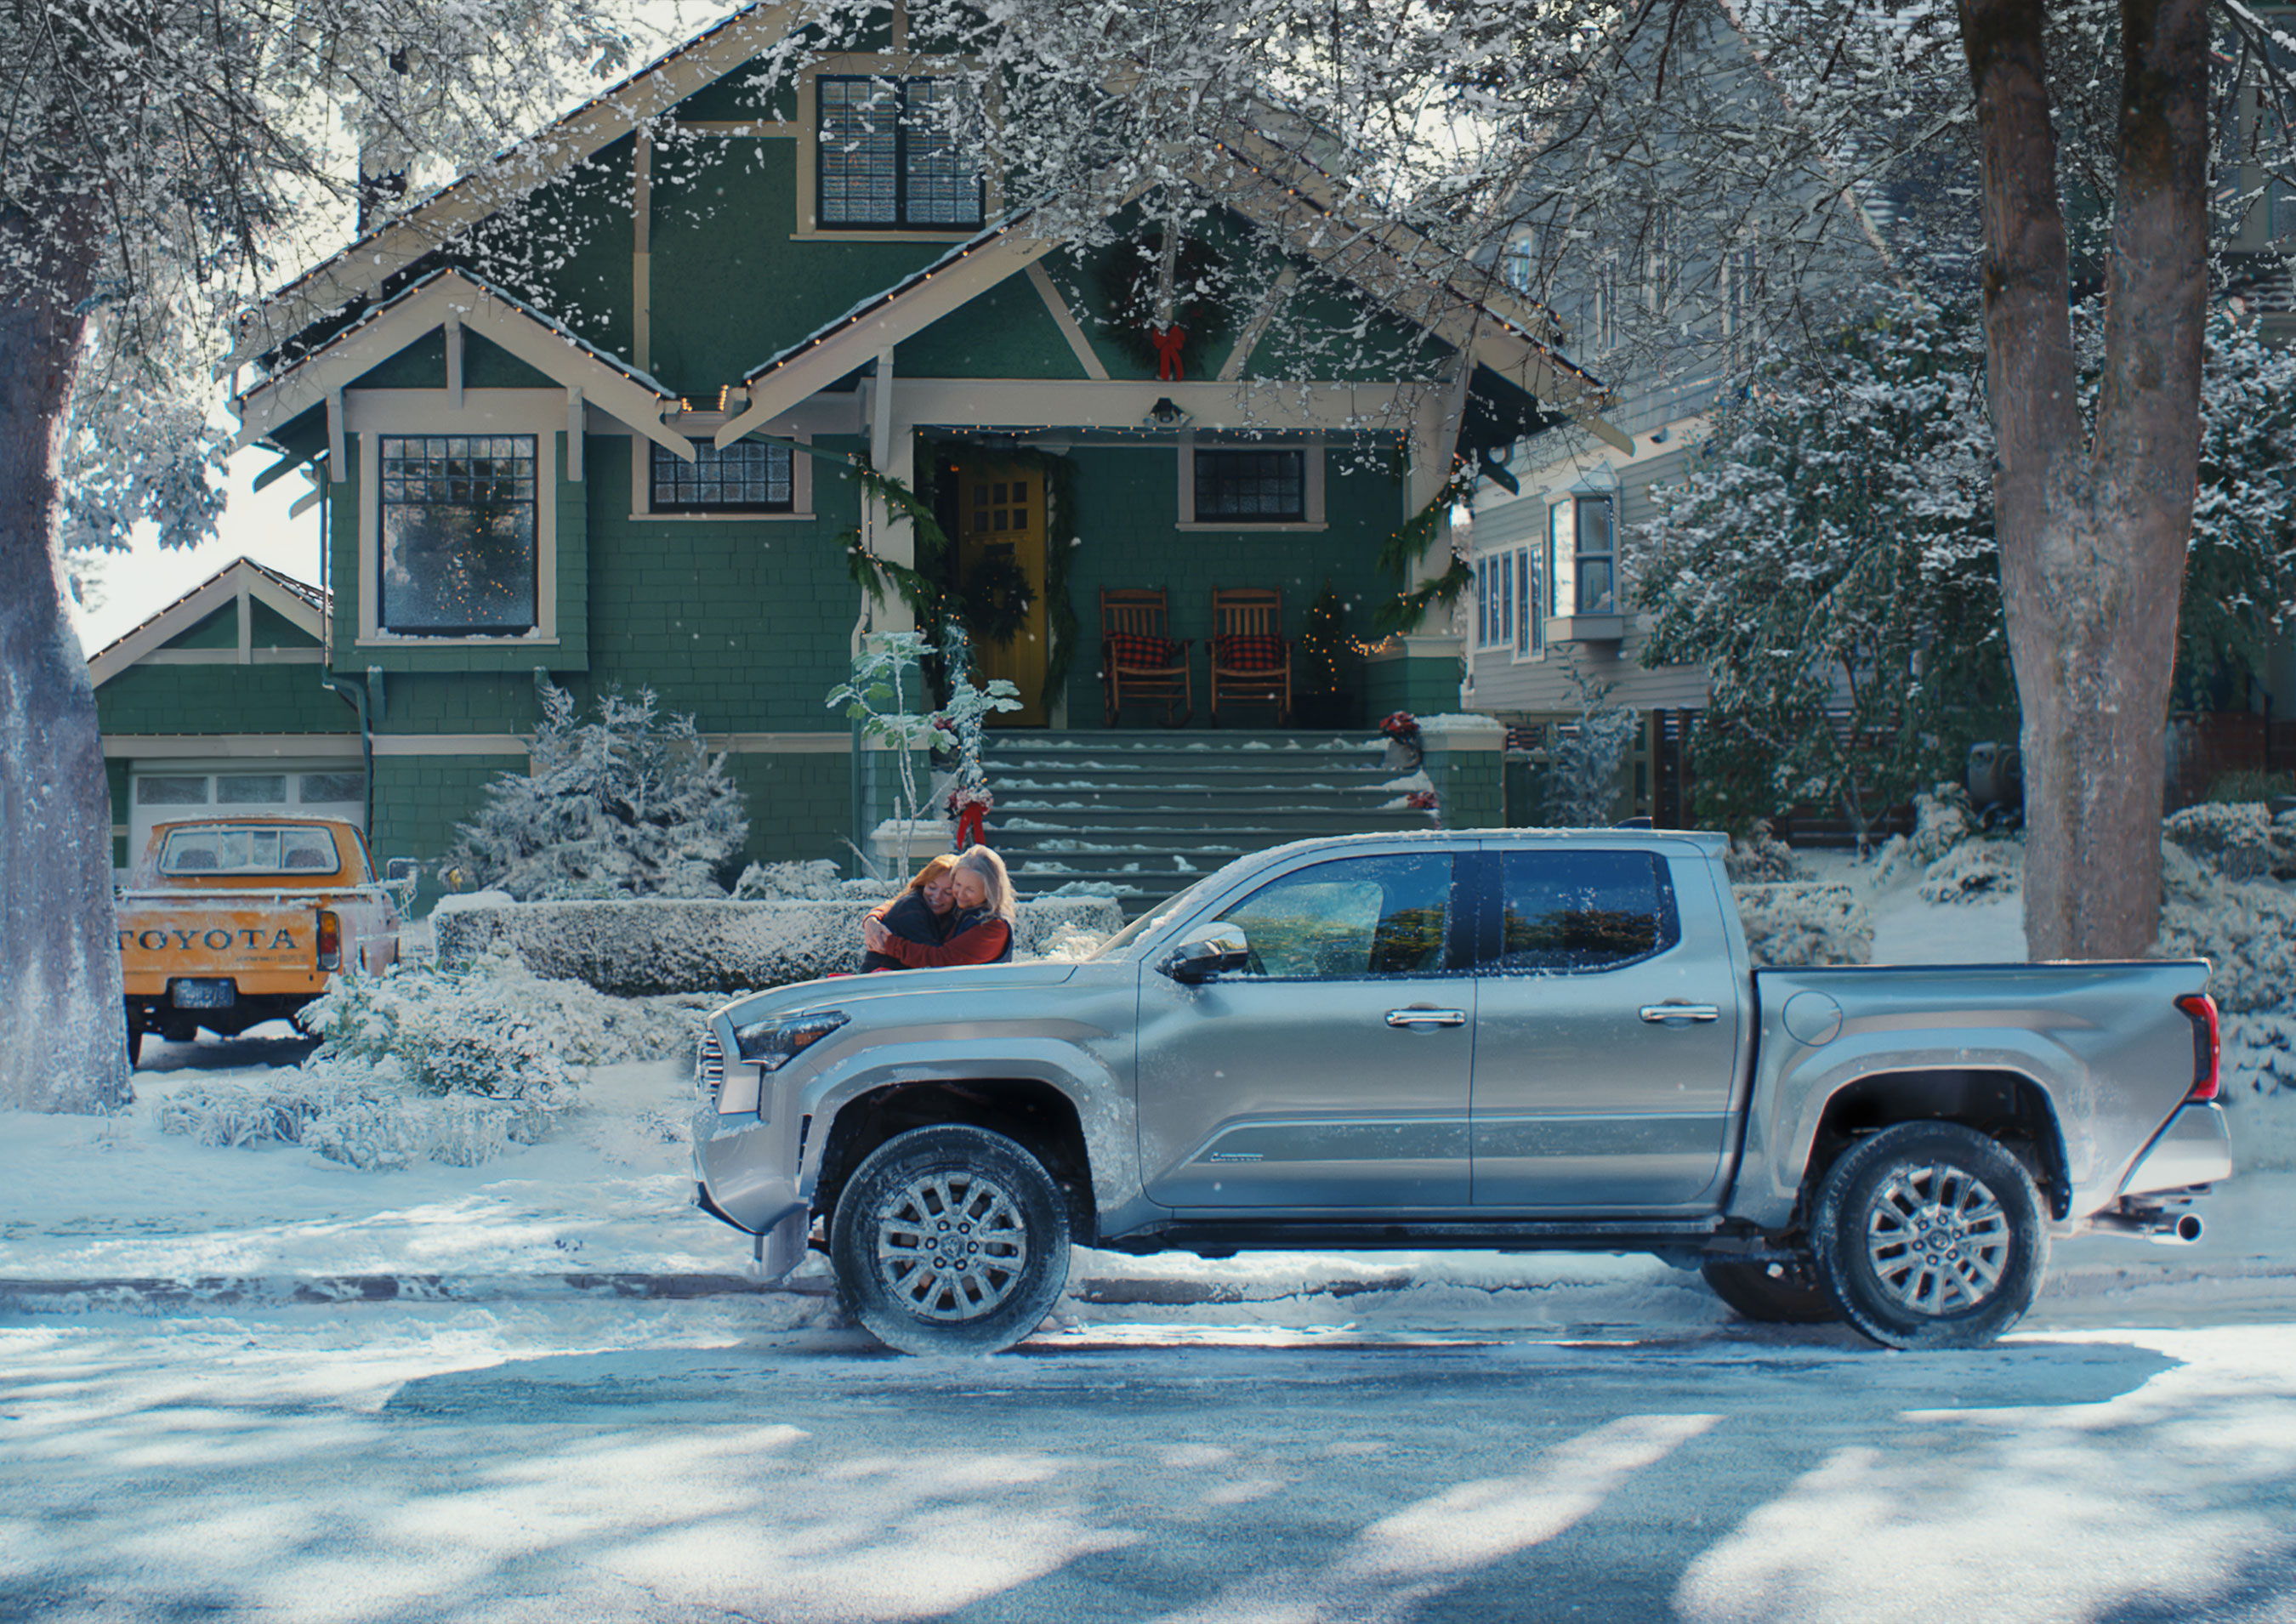 Toyota’s holiday spot “Present from the Past” shares a heartwarming holiday message, developed by Saatchi & Saatchi.